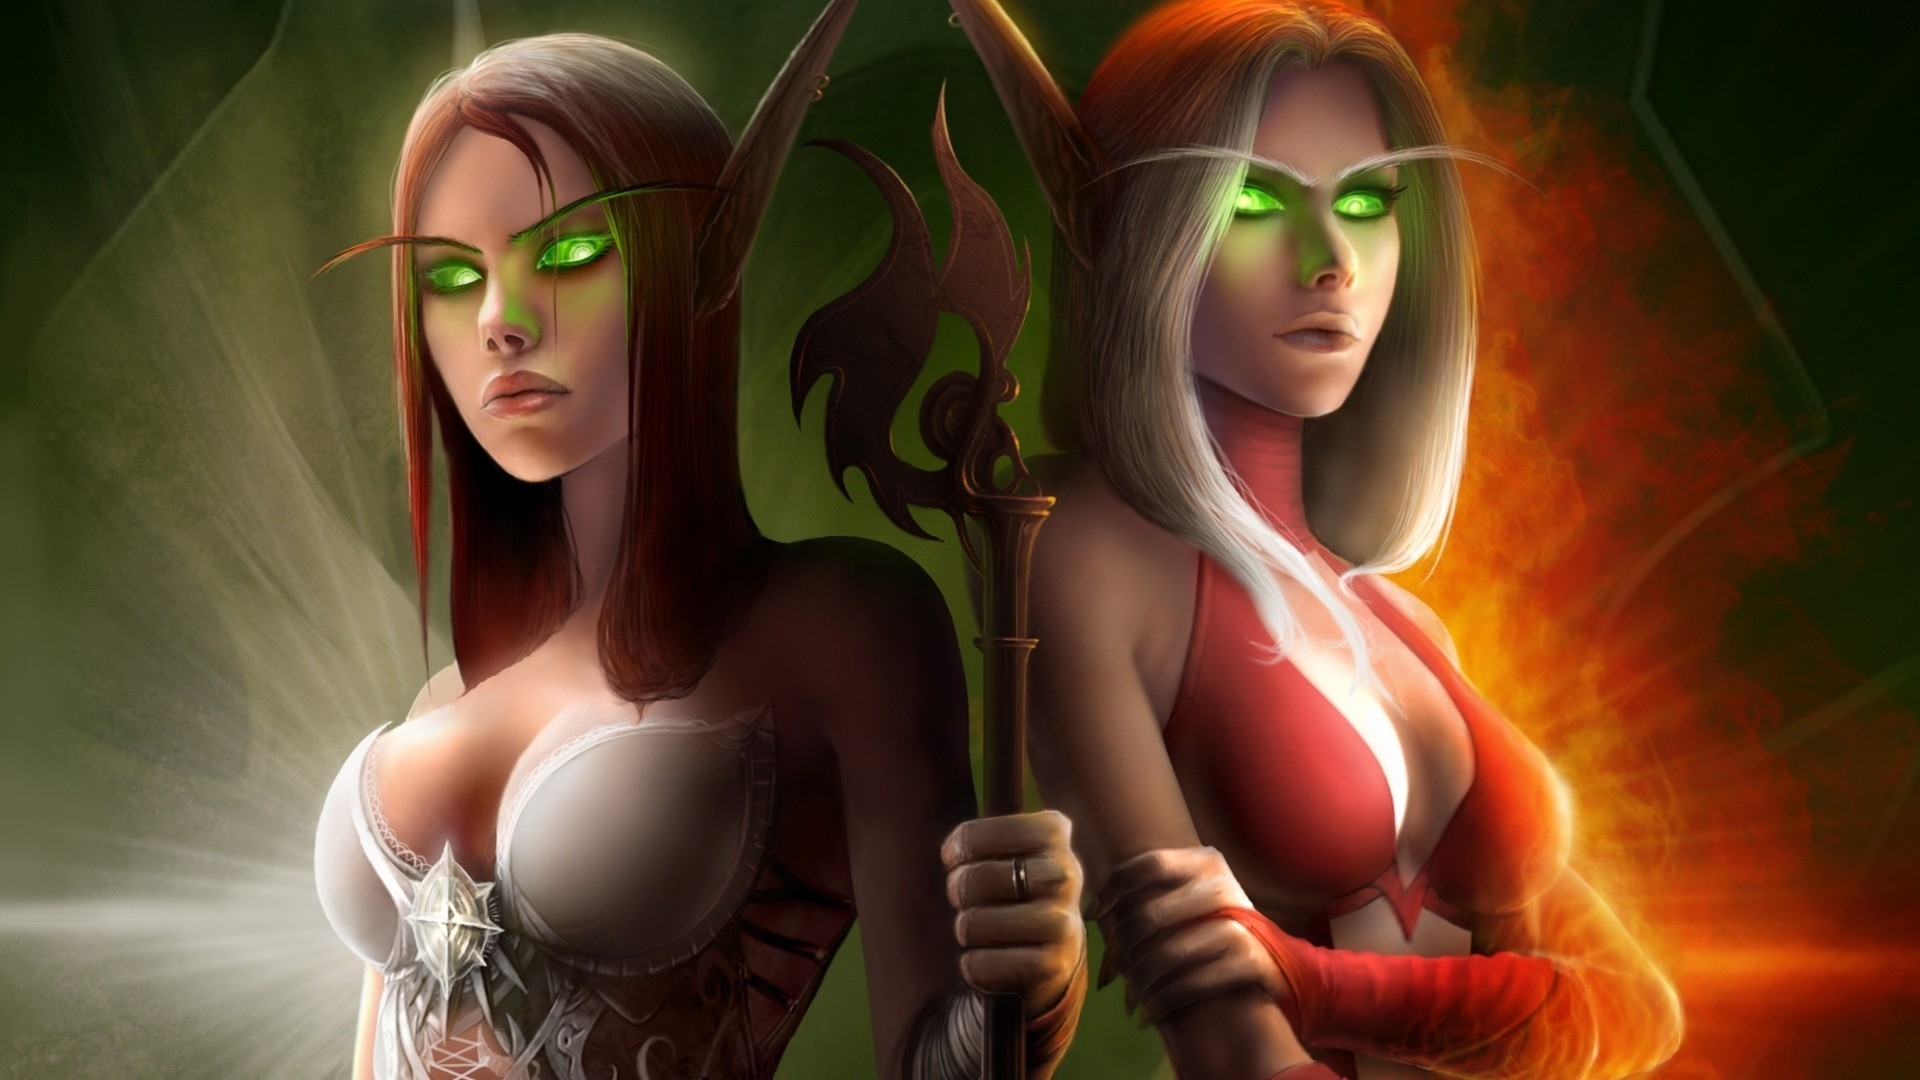 World of Warcraft Elf Costumes for 1920 x 1080 HDTV 1080p resolution